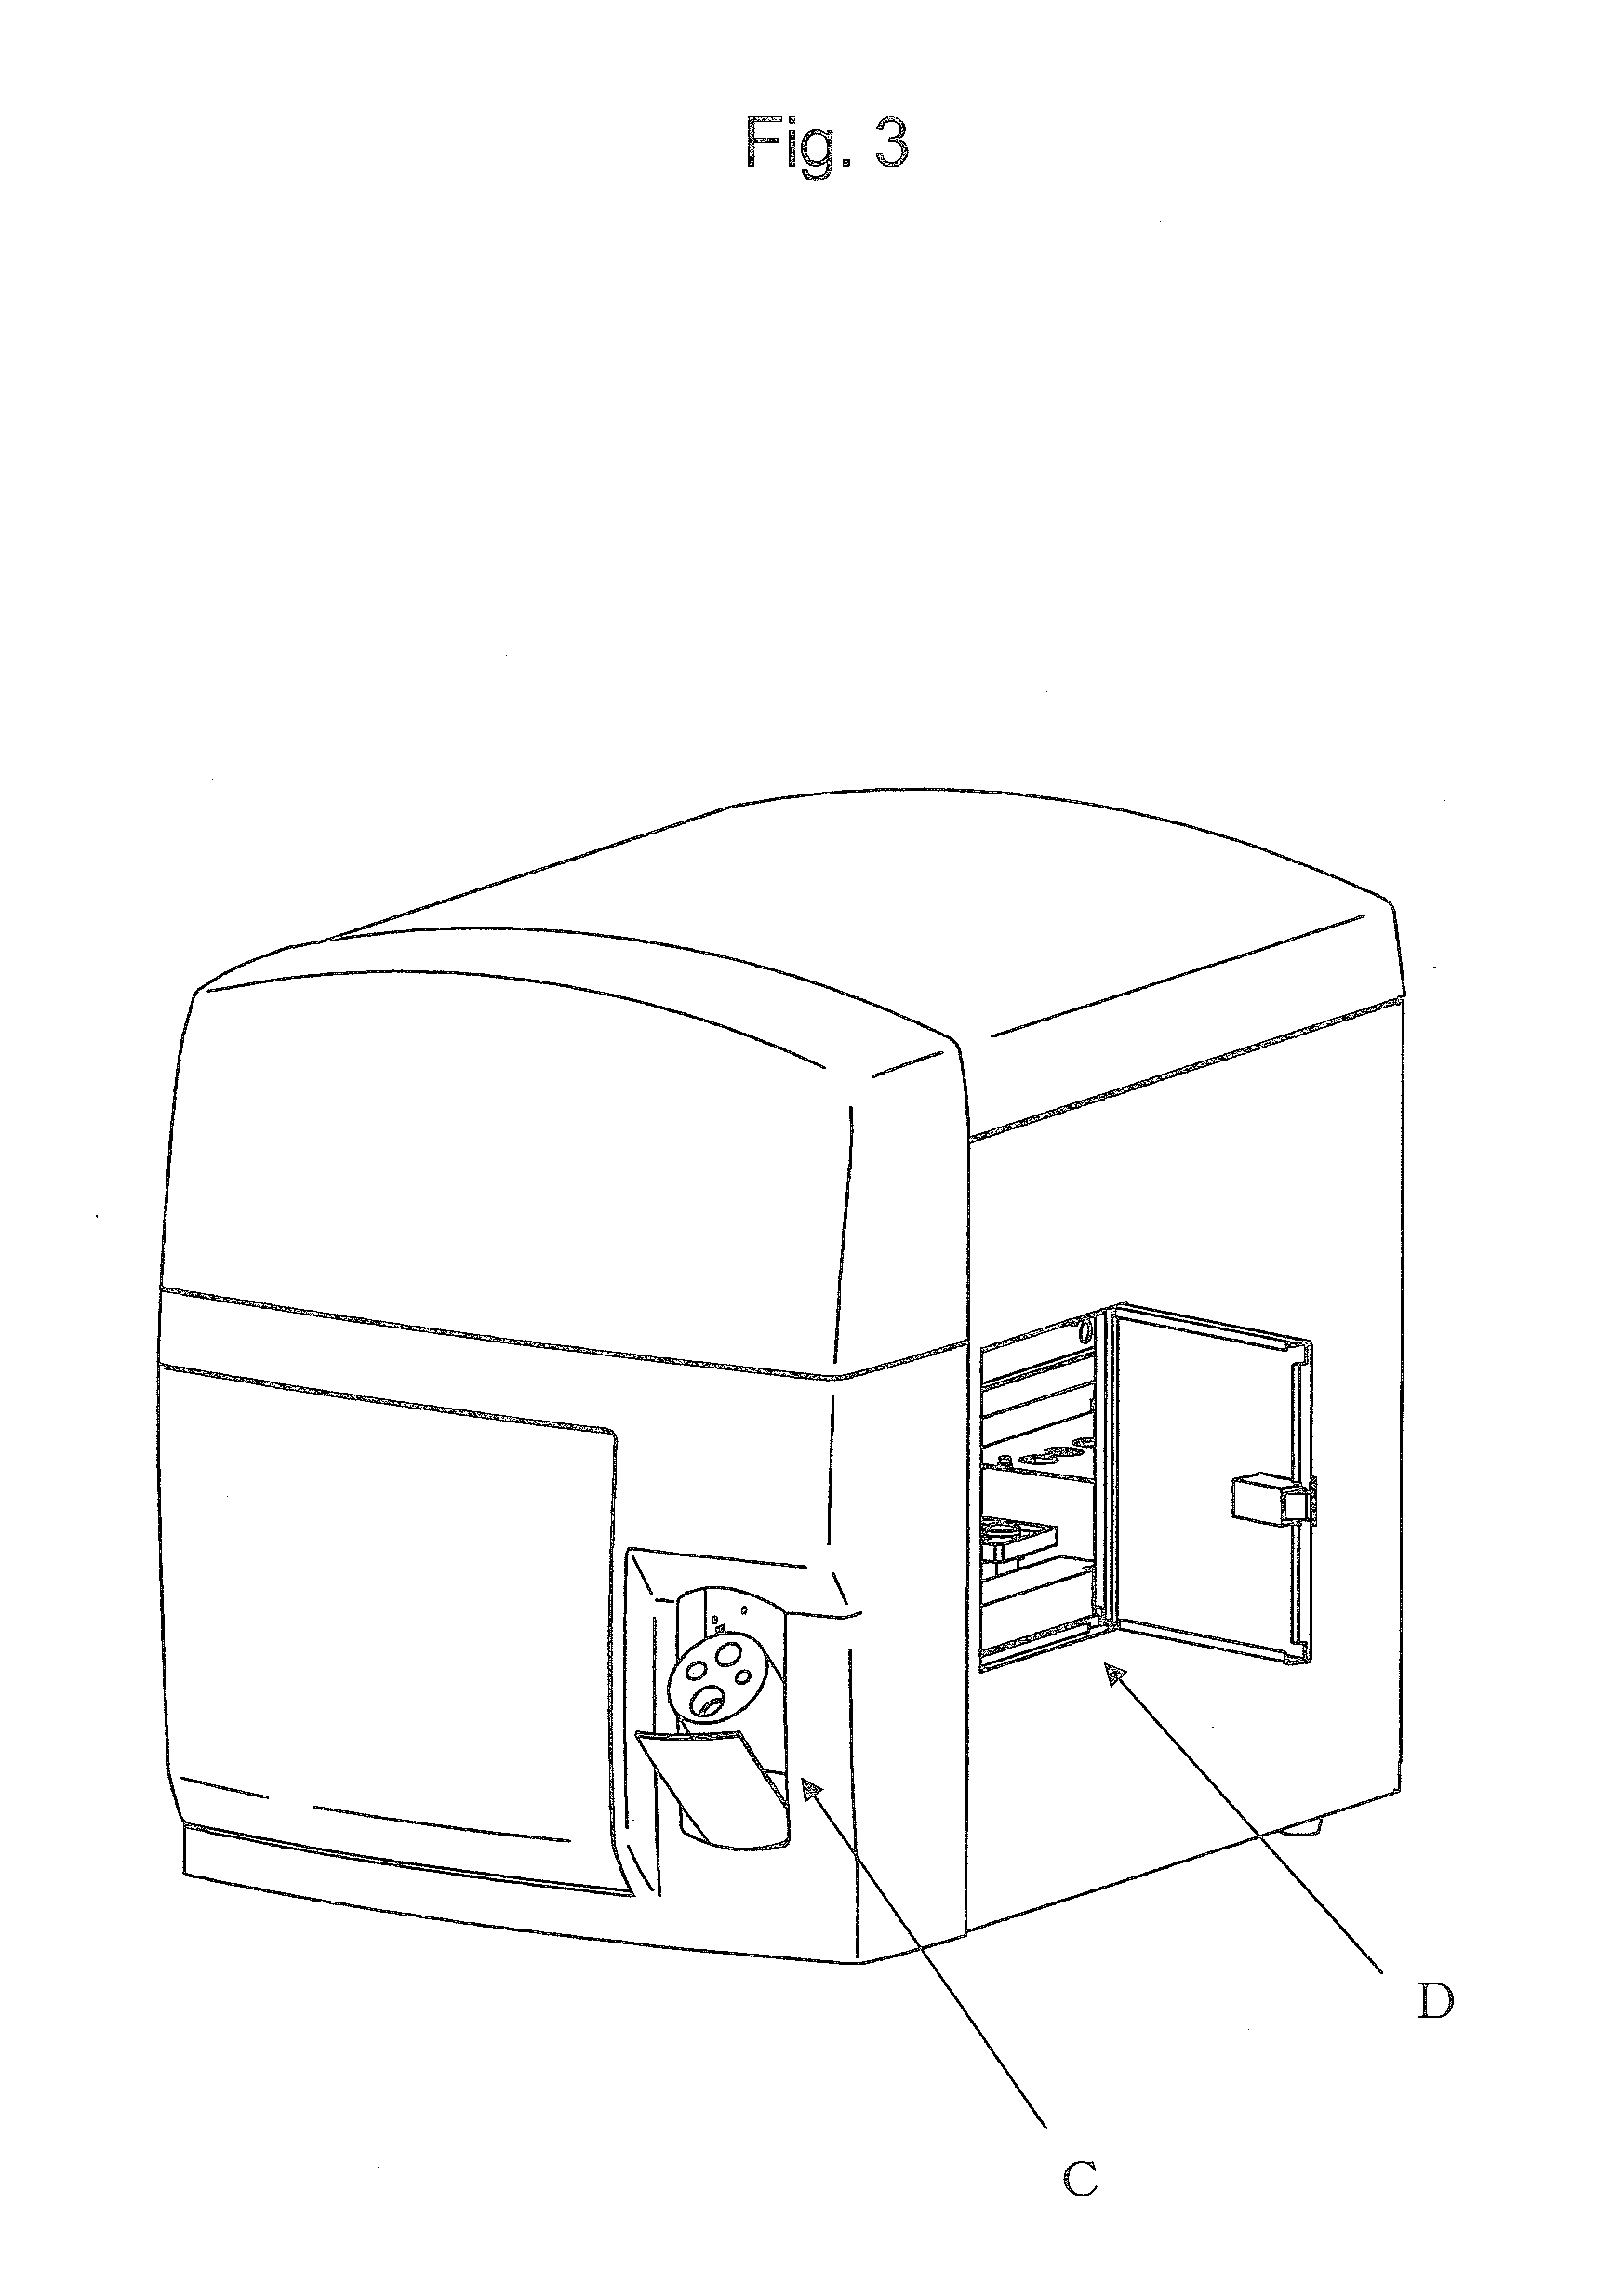 Apparatus for measuring blood cells and immunity from whole blood